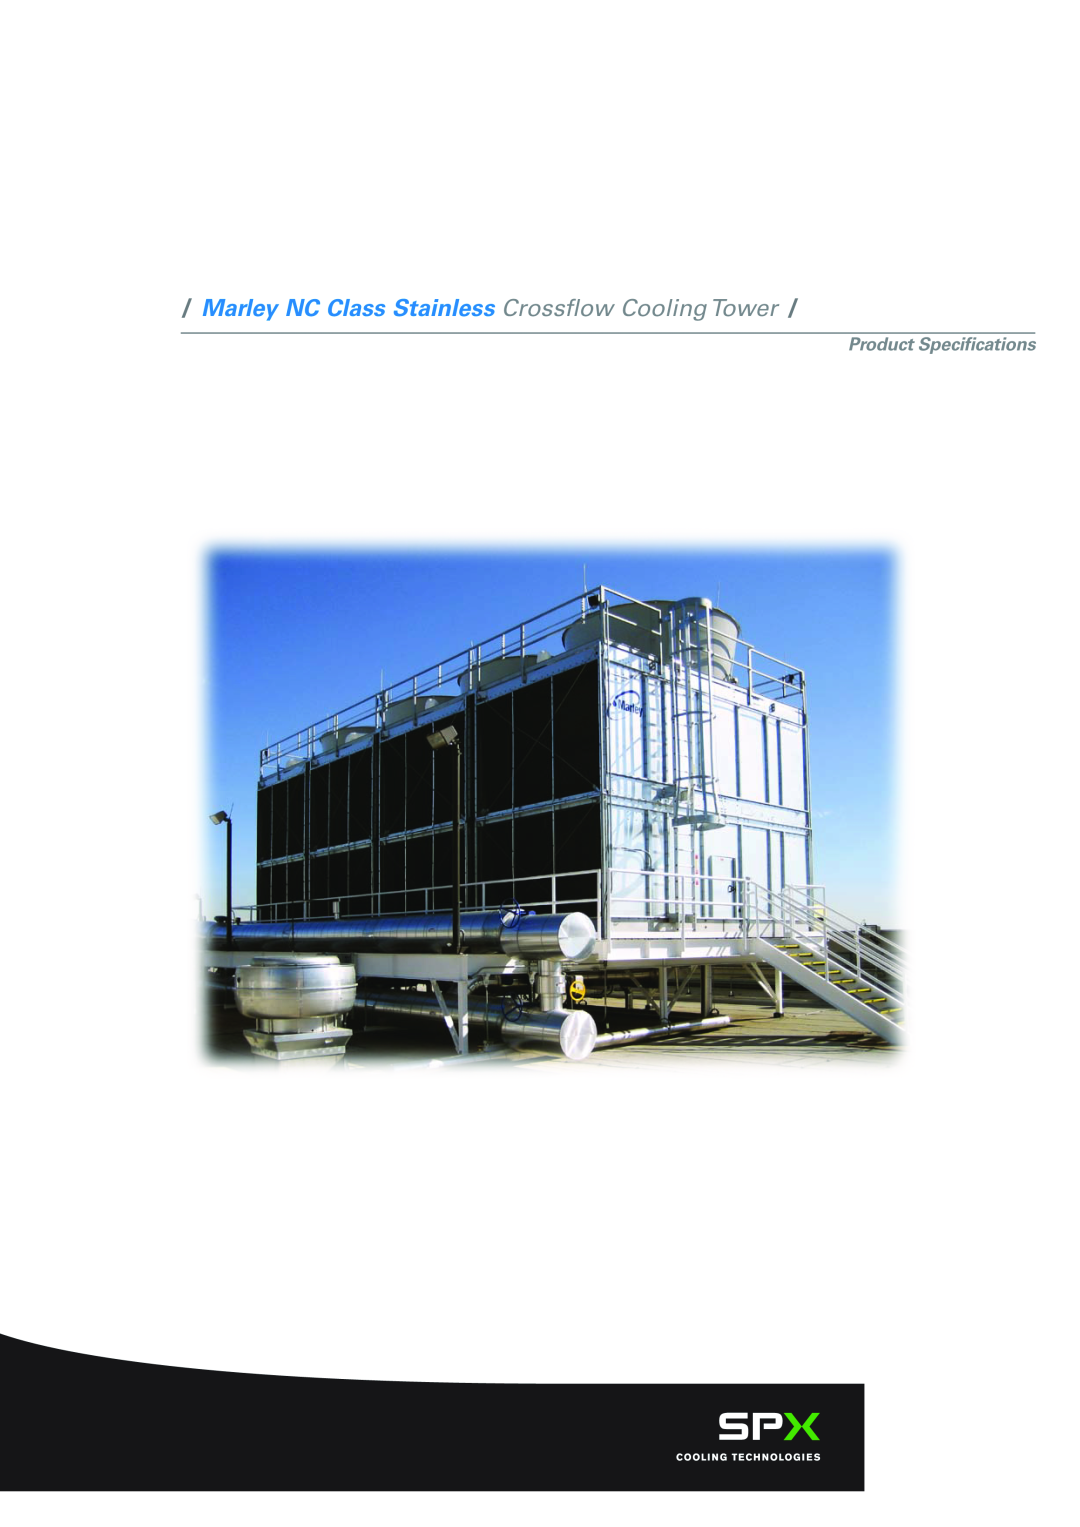 SPX Cooling Technologies SS-NC-08A specifications Marley NC Class Stainless Crossflow Cooling Tower 